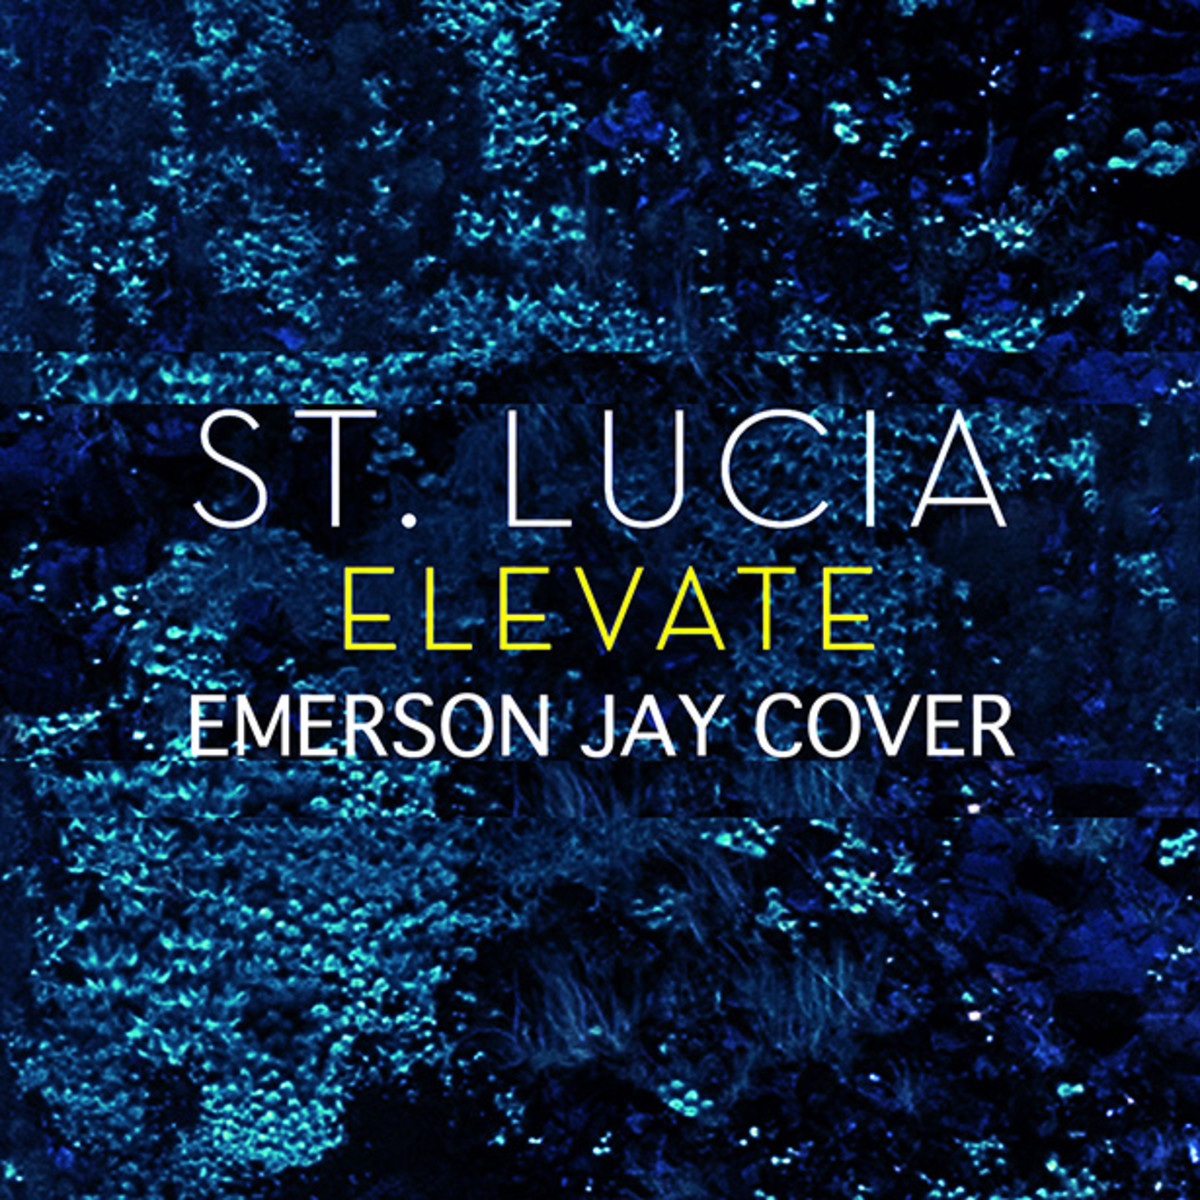 PREMIERE: Emerson Jay Cover St. Lucia